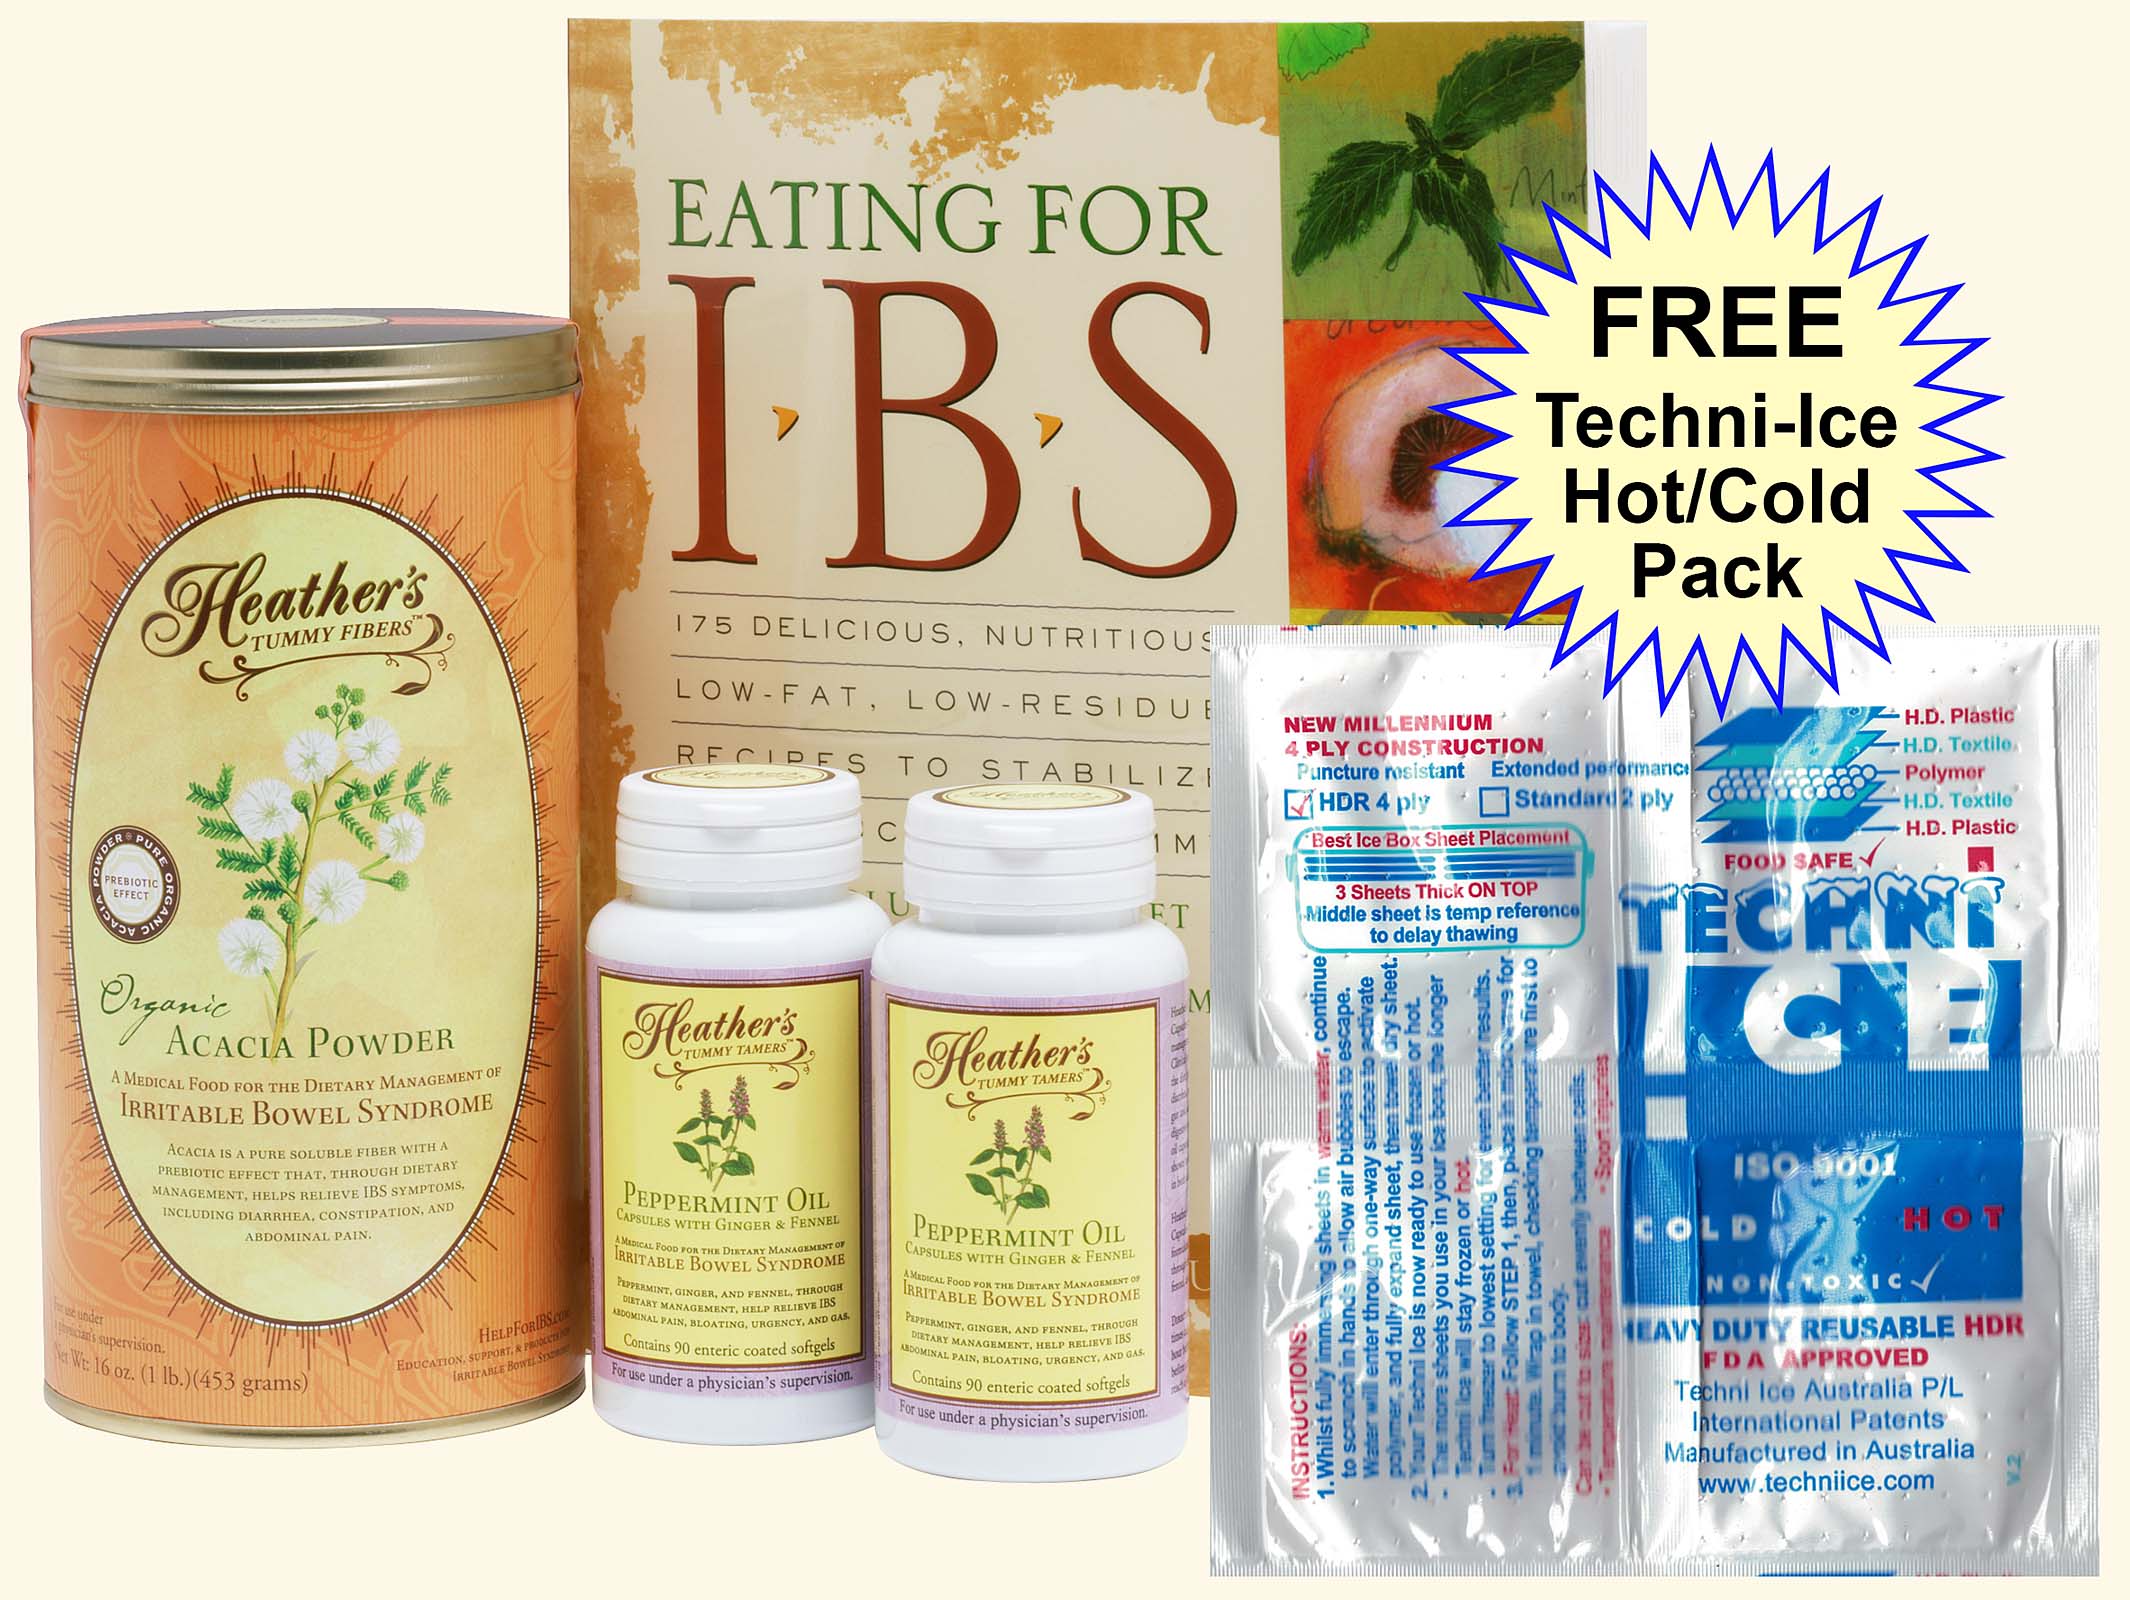 IBS Diet Kit #2 Eating for IBS, Tummy Fiber Acacia Can, Tummy Tamers  Peppermint Caps <font color=